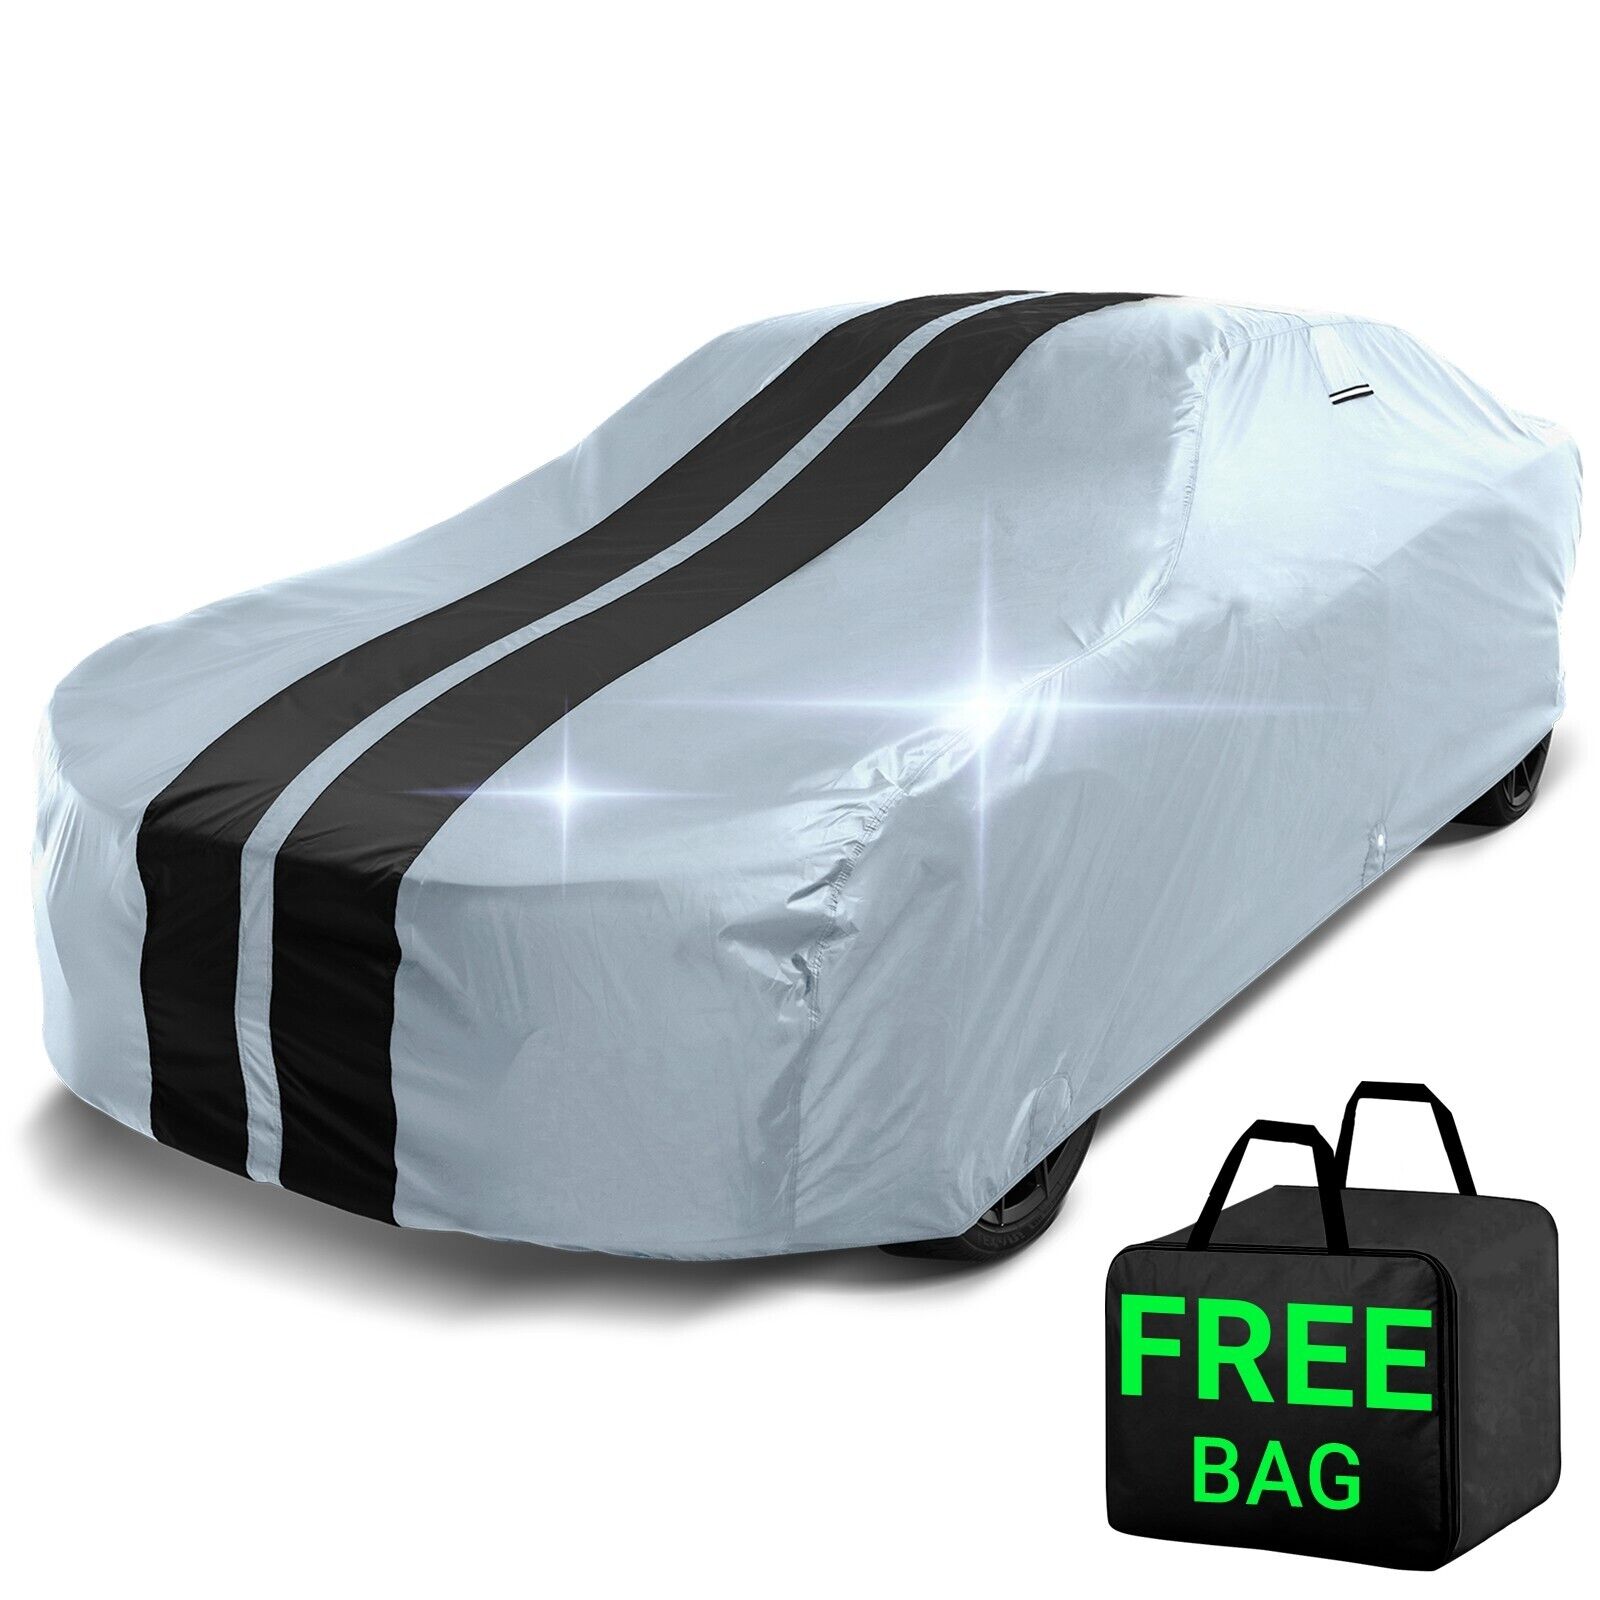 1997-2002 Chrysler Plymouth Prowler Custom Car Cover - All-Weather Waterproof